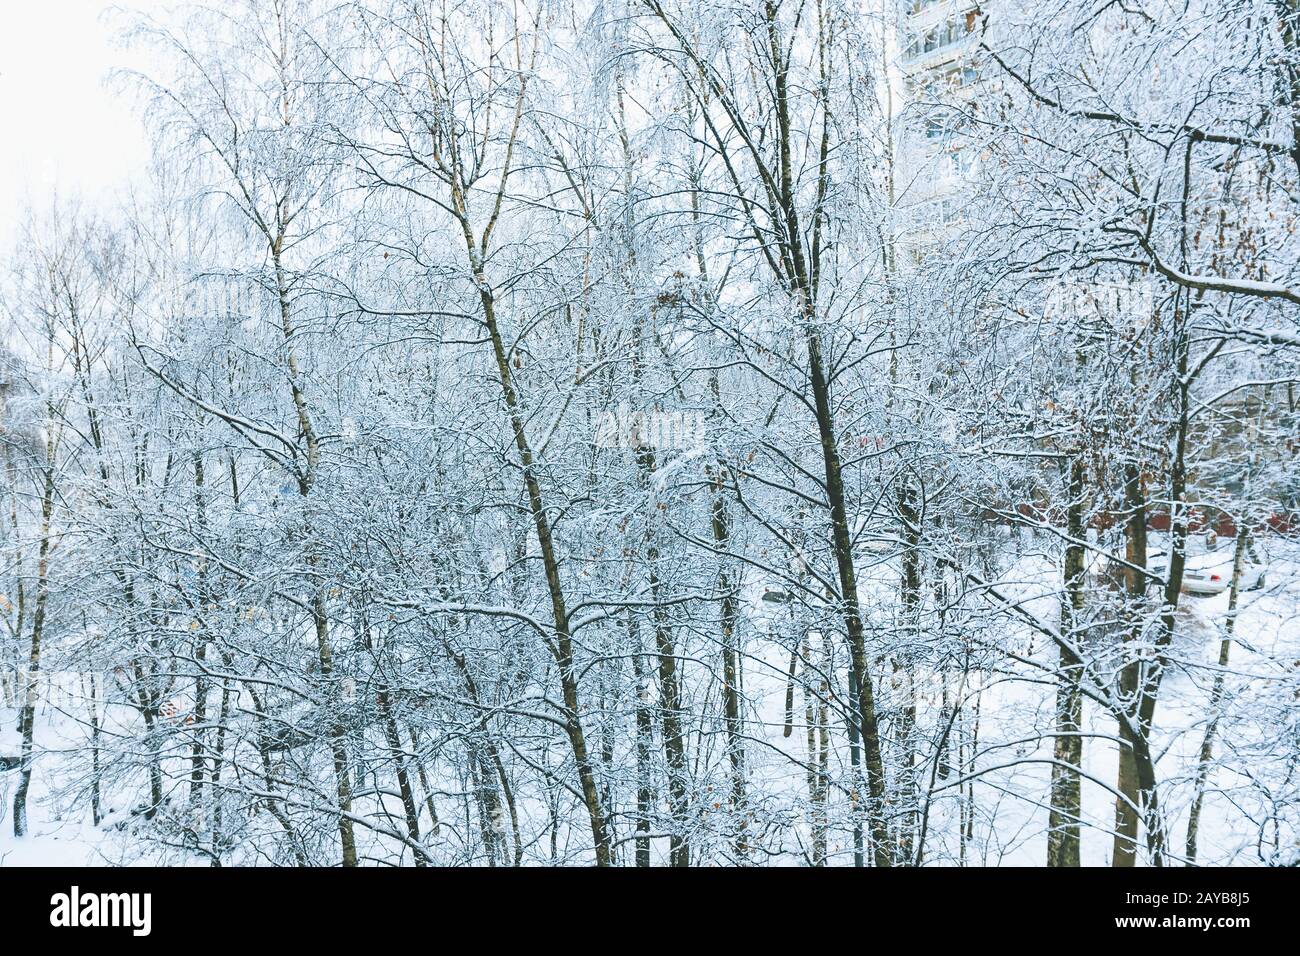 Winter snowy day in a beautiful at the edge of the forest Stock Photo